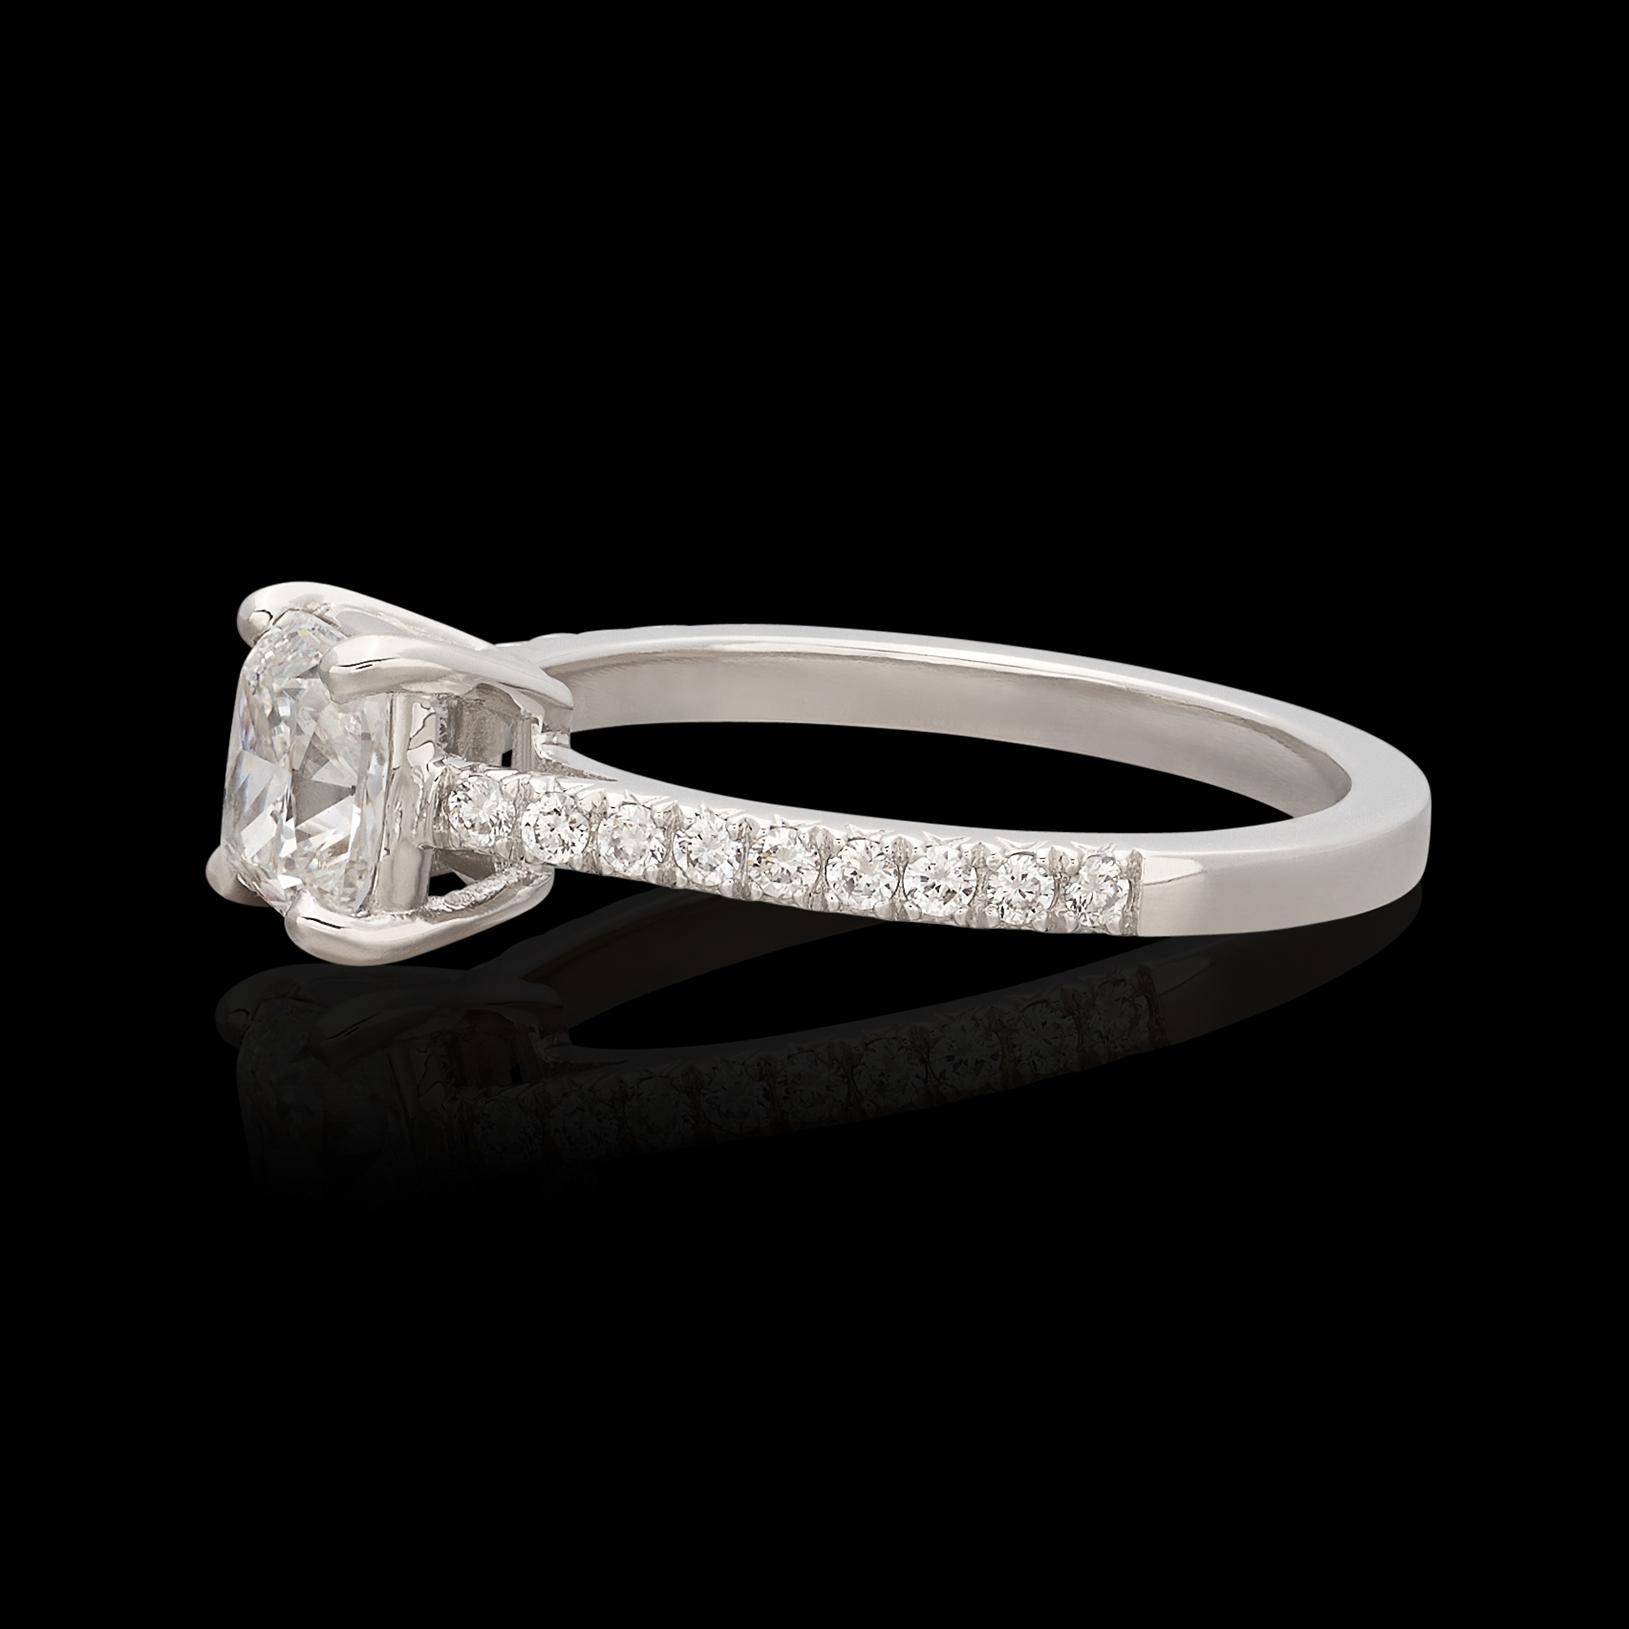 Remarkable Platinum GIA Cushion Cut Diamond Ring For Sale 2